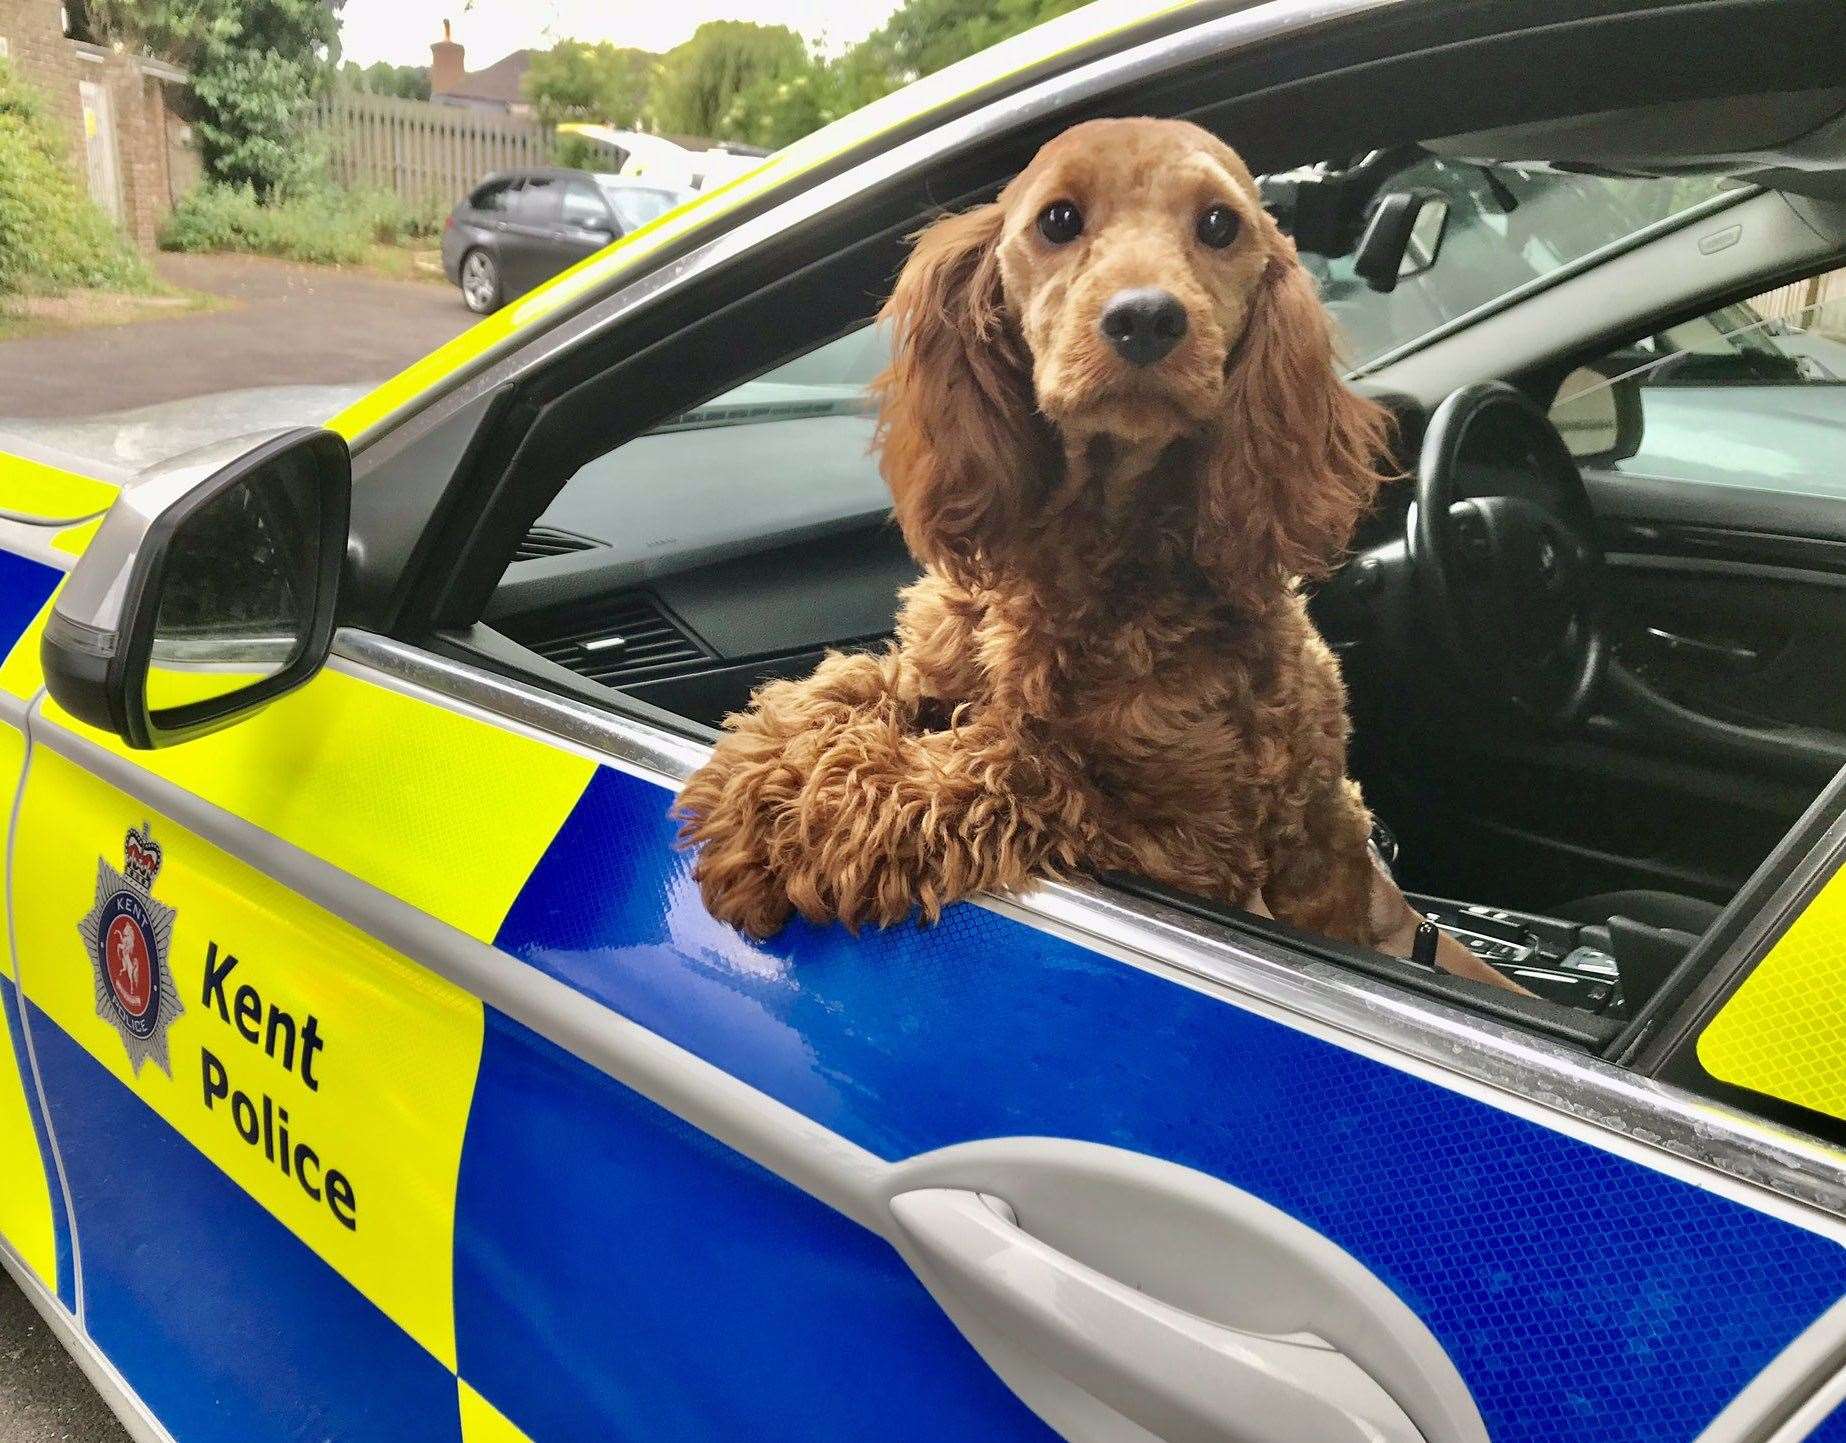 Stolen dog Peanut was found wandering along A249 in Miadstone near the Stockbury roundabout. Picture: @KPTacOps